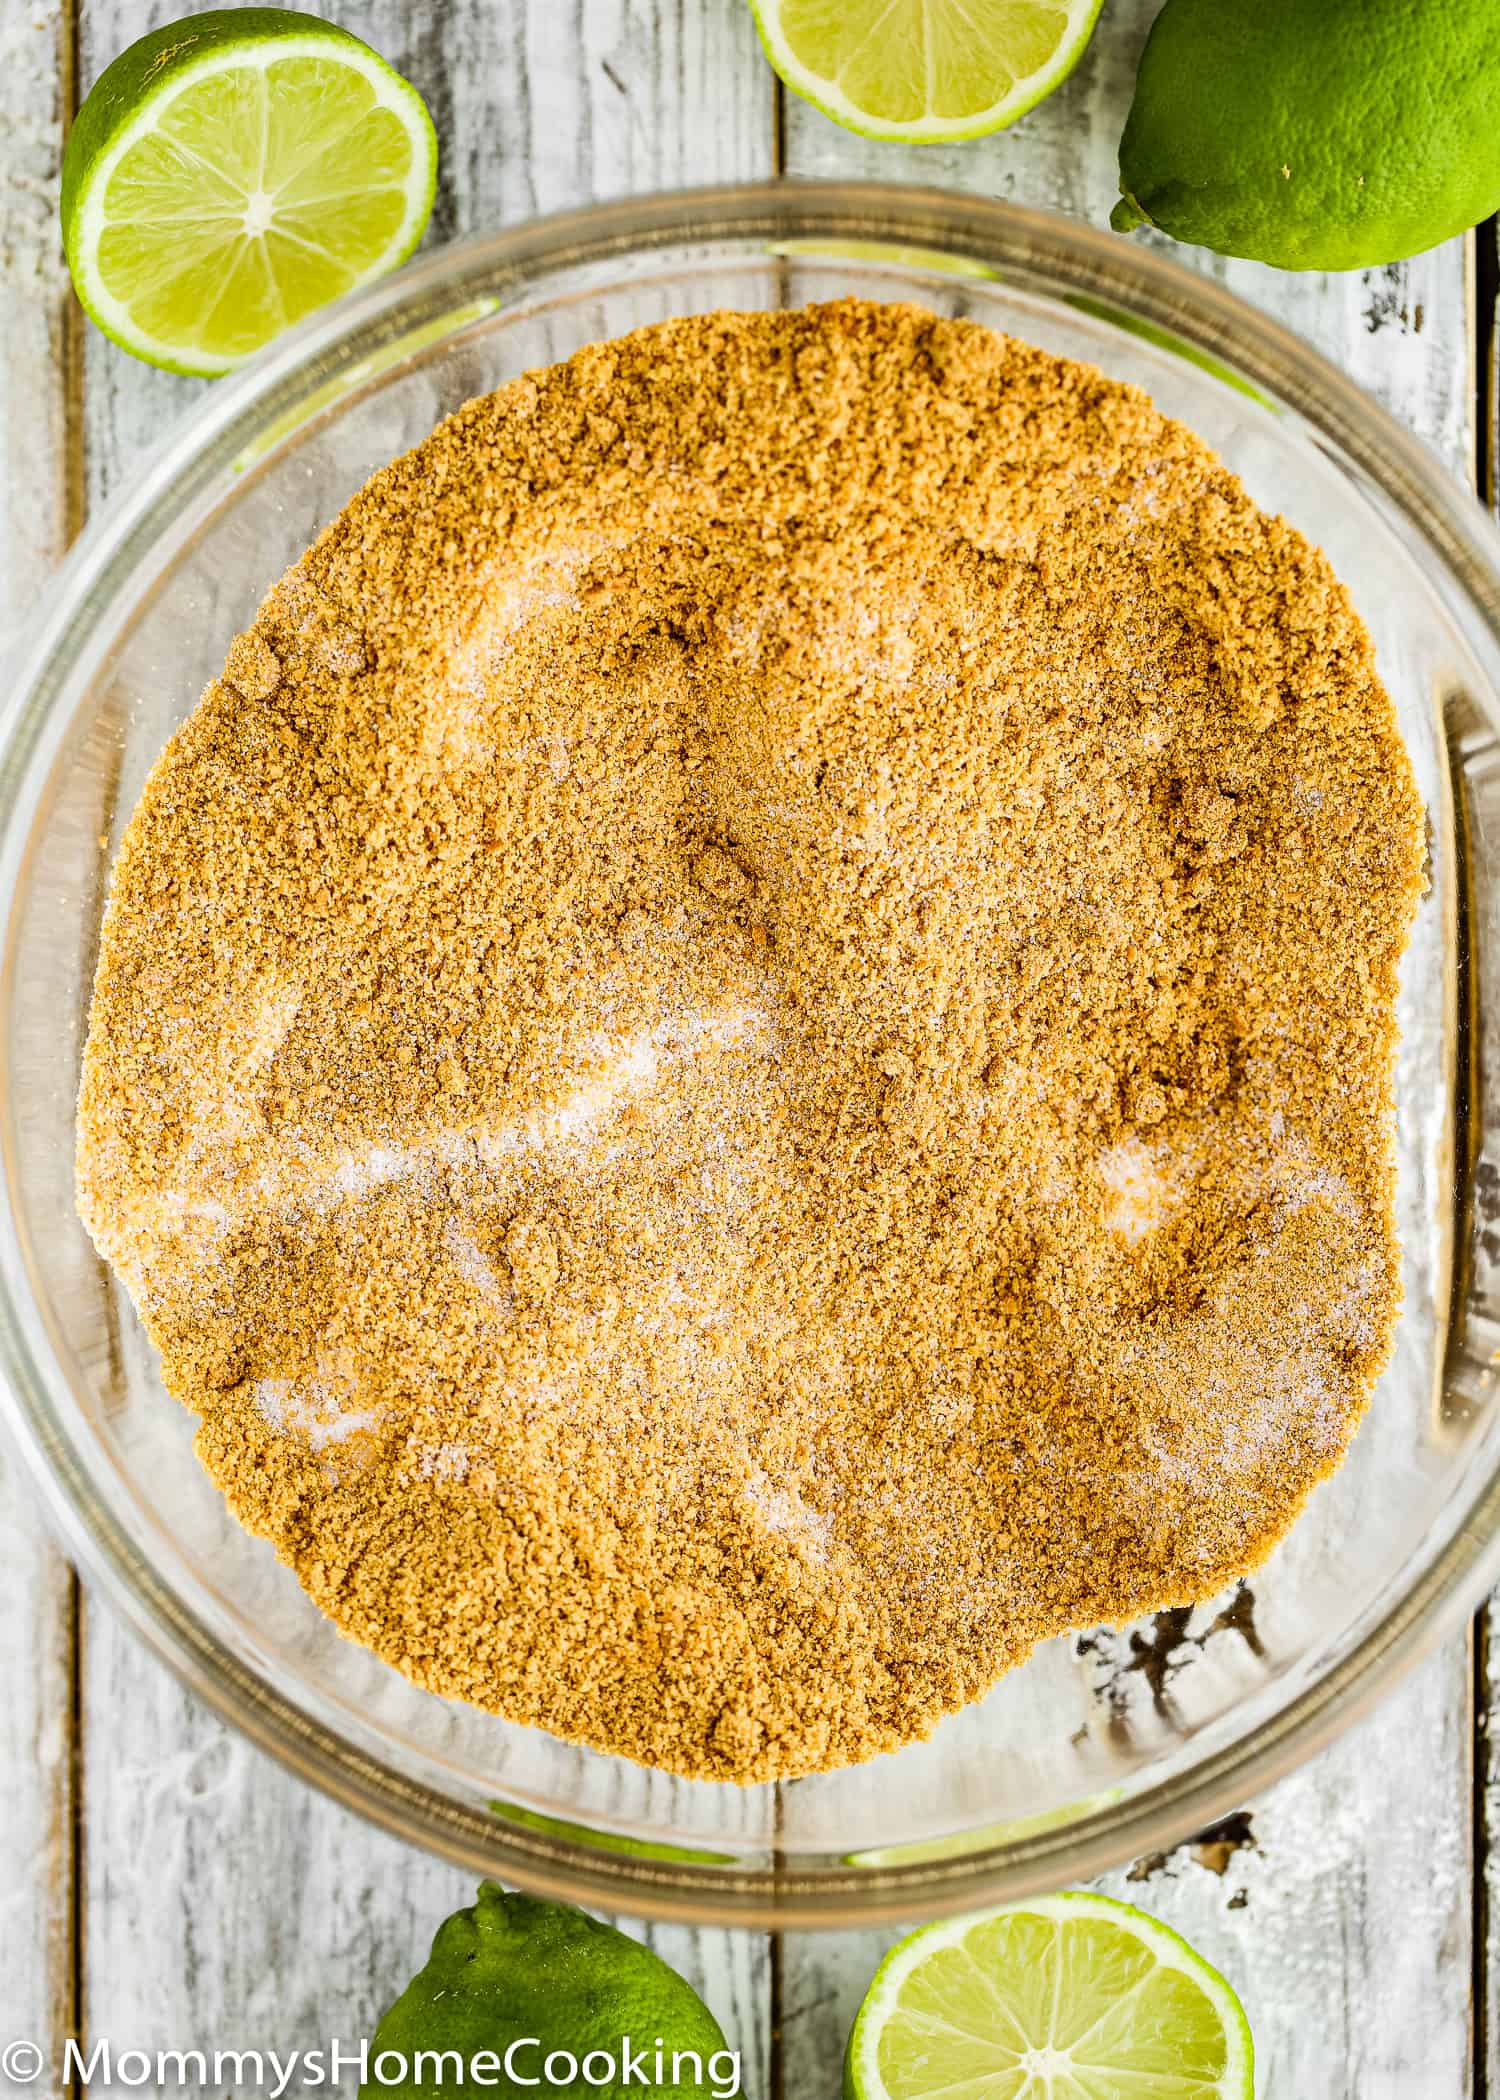 graham cracker crumbs with sugar in a bowl.